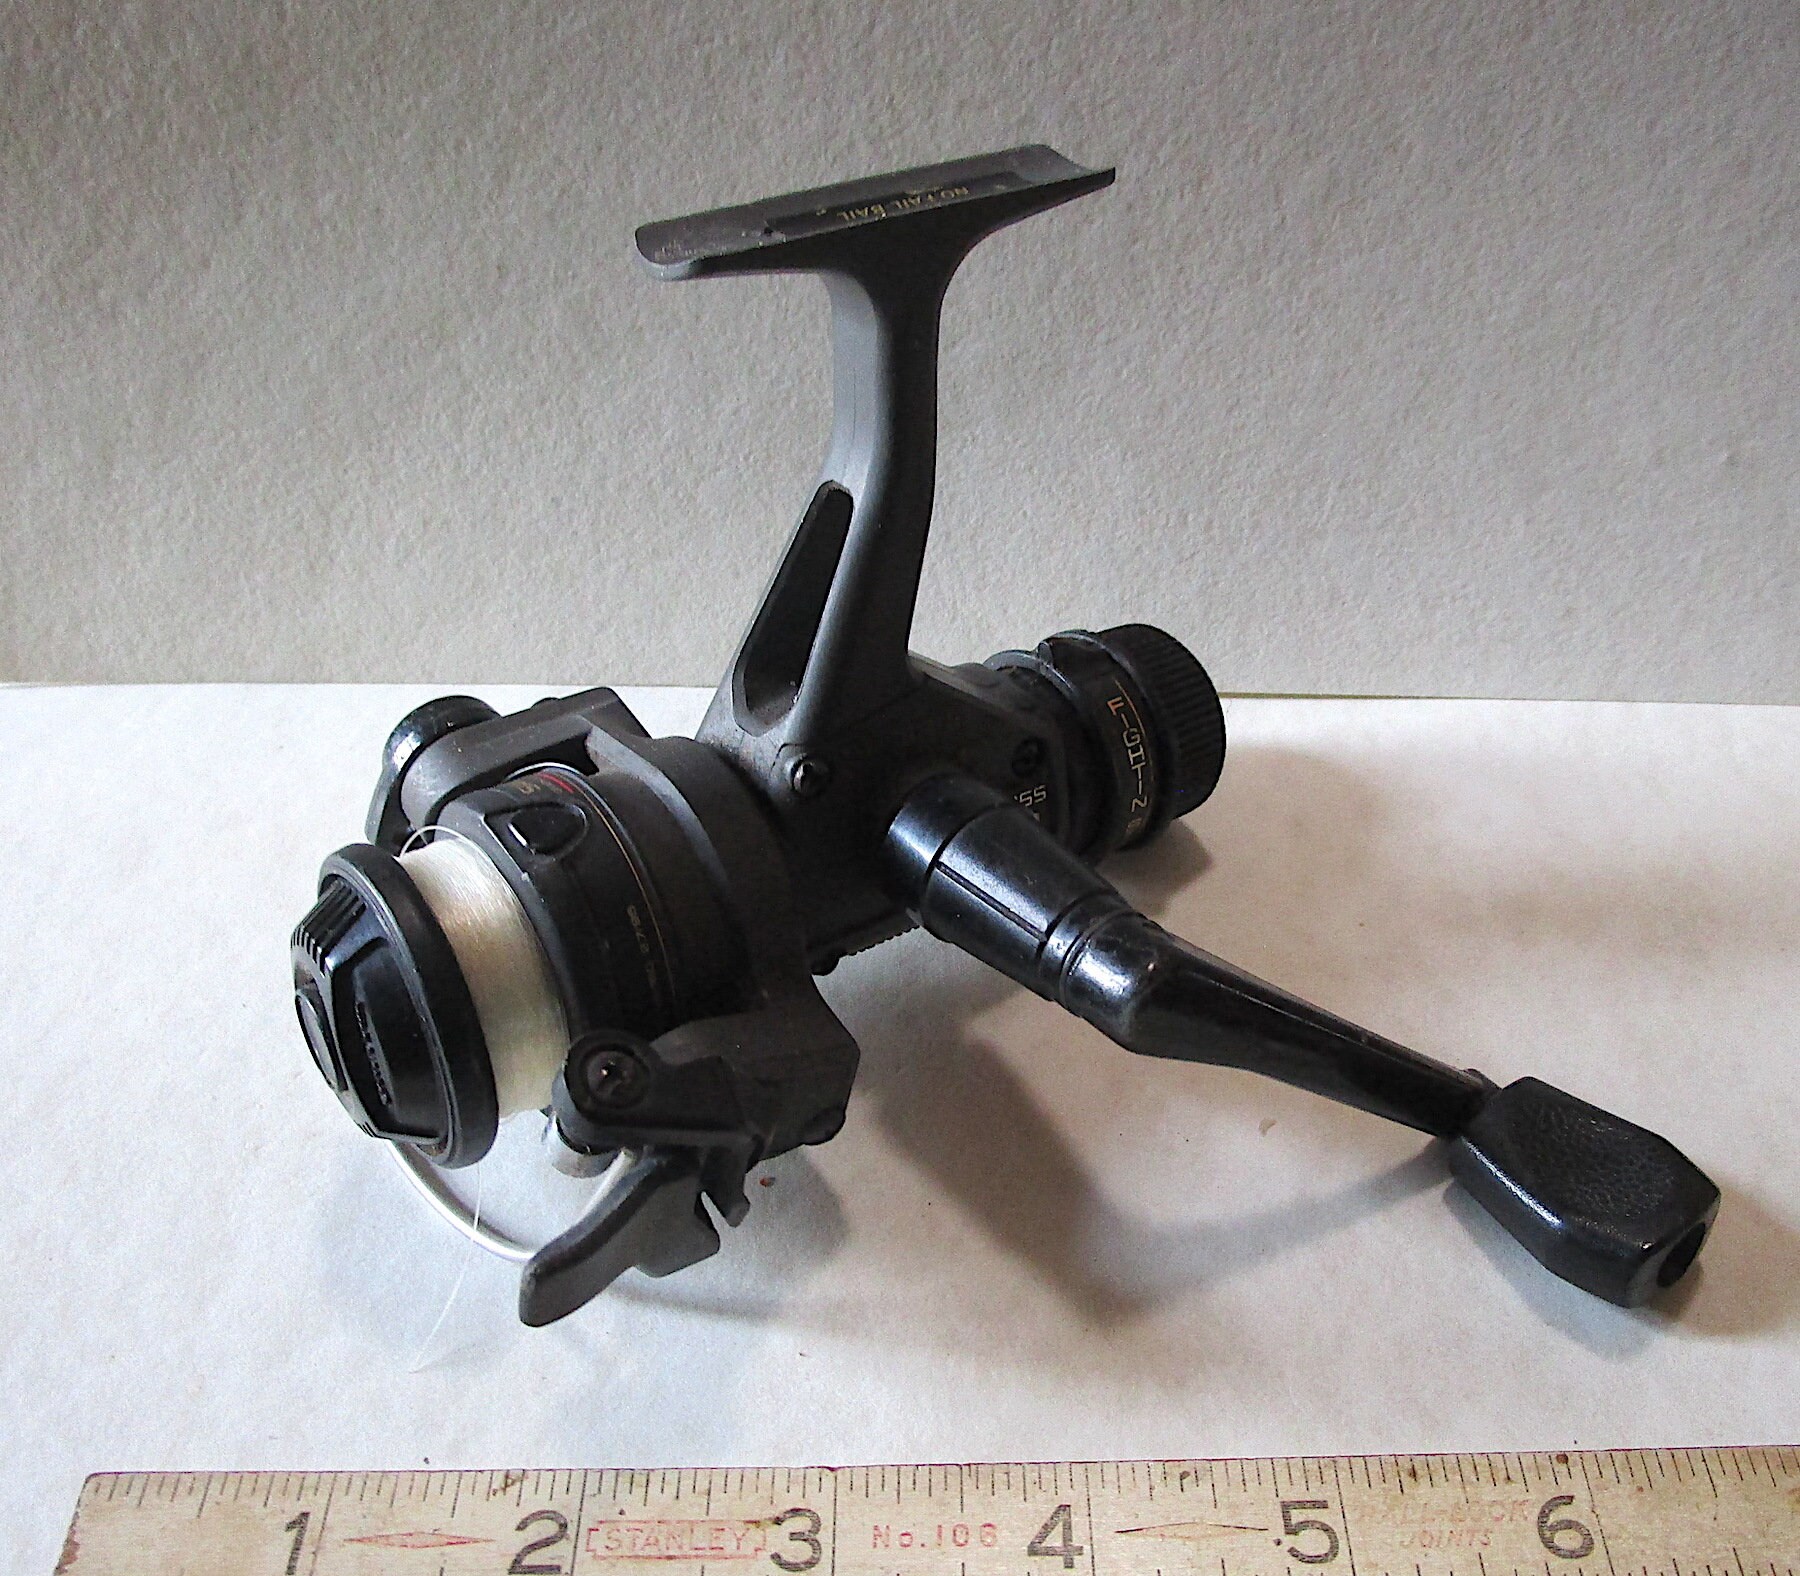 SM156 Shimano bass One Light Spin Fishing Reel Bass, Trout, Crappie,  Panfish Take It Fishing These Old Stock Shimano's Are Great 